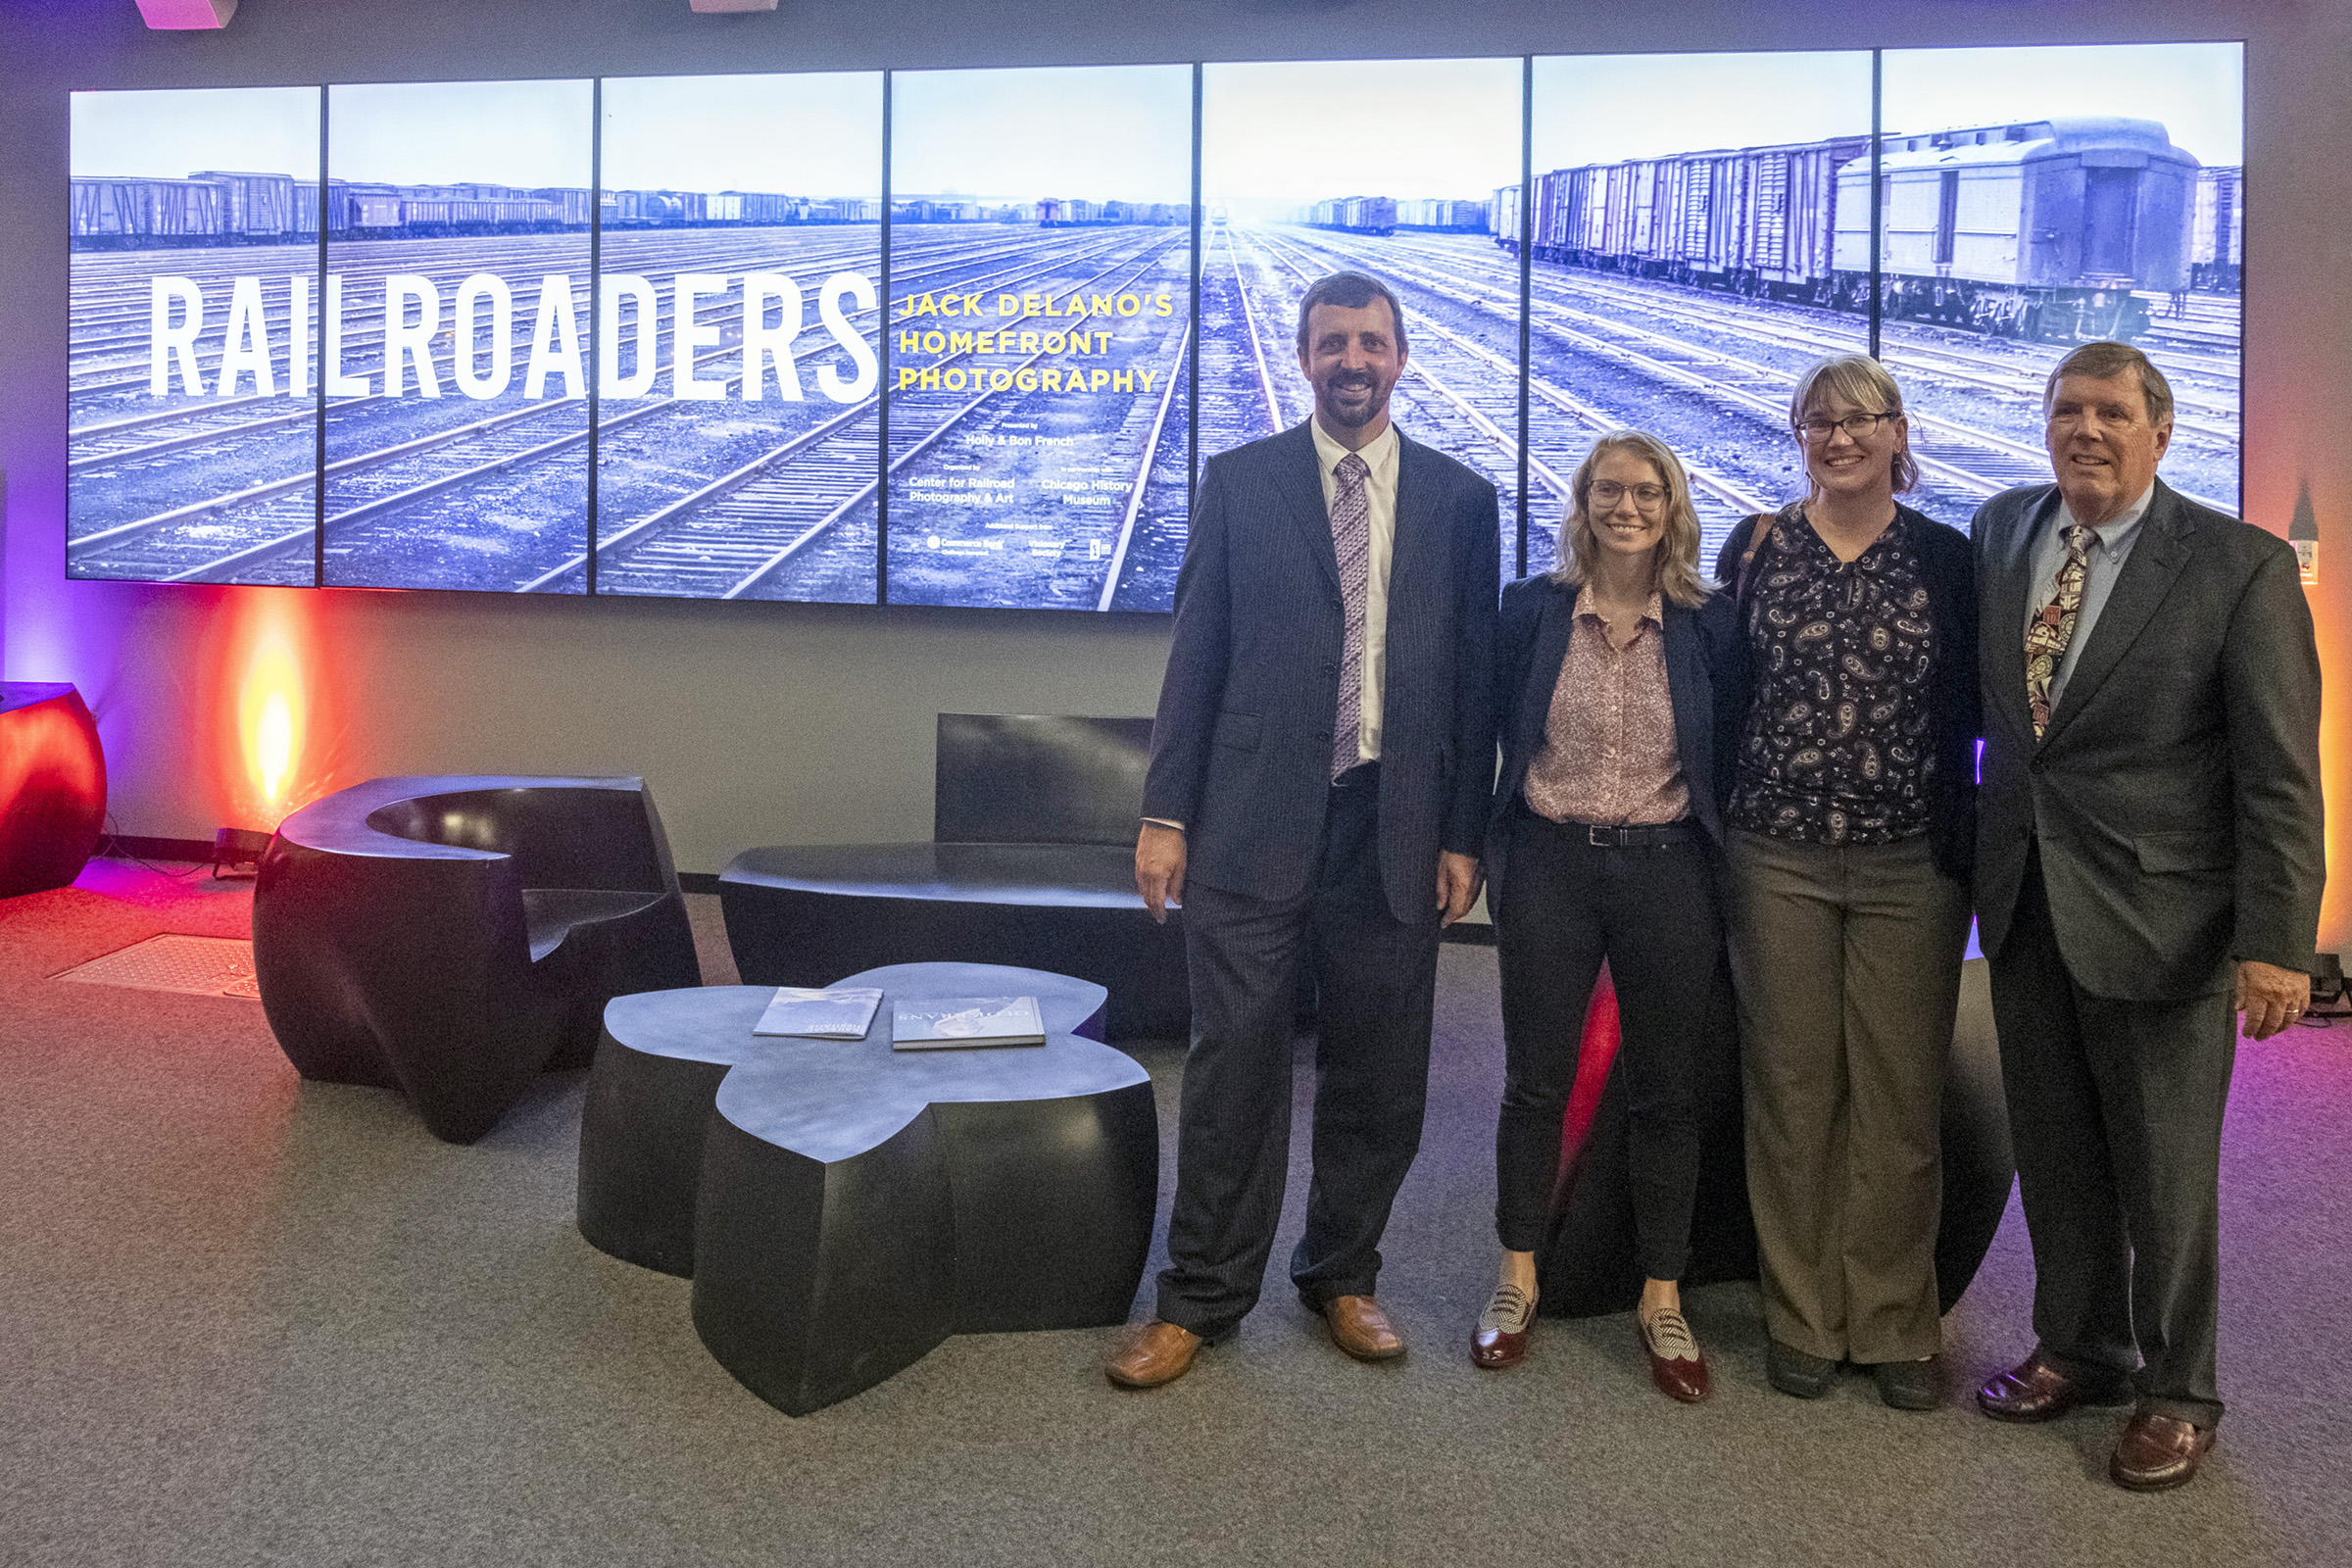 Four people standing in front of signage for "Railroaders" museum exhibit